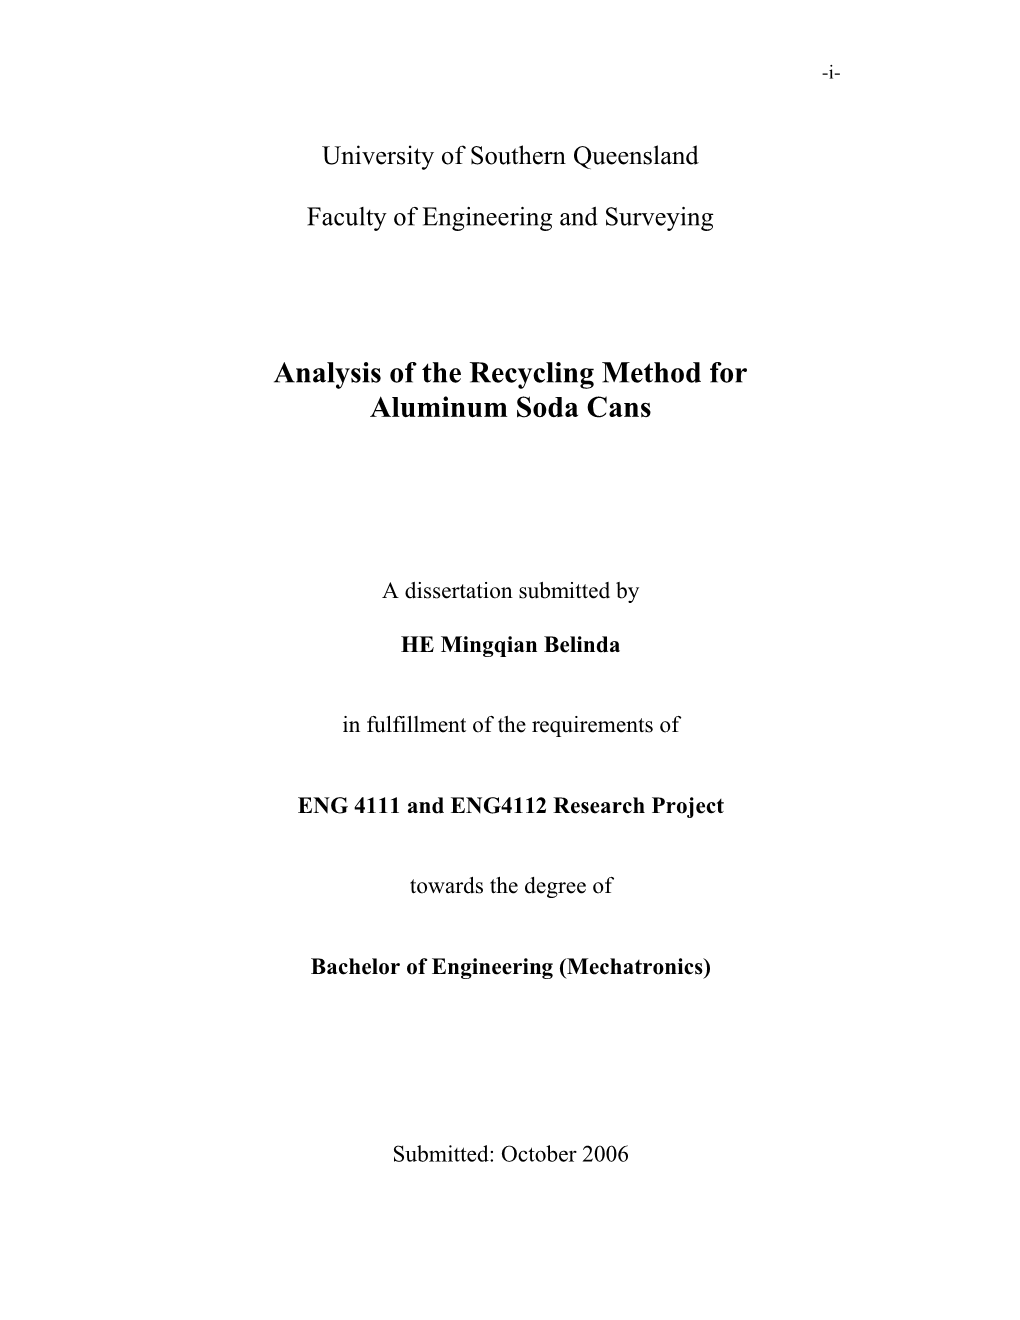 Analysis of the Recycling Method for Aluminum Soda Cans